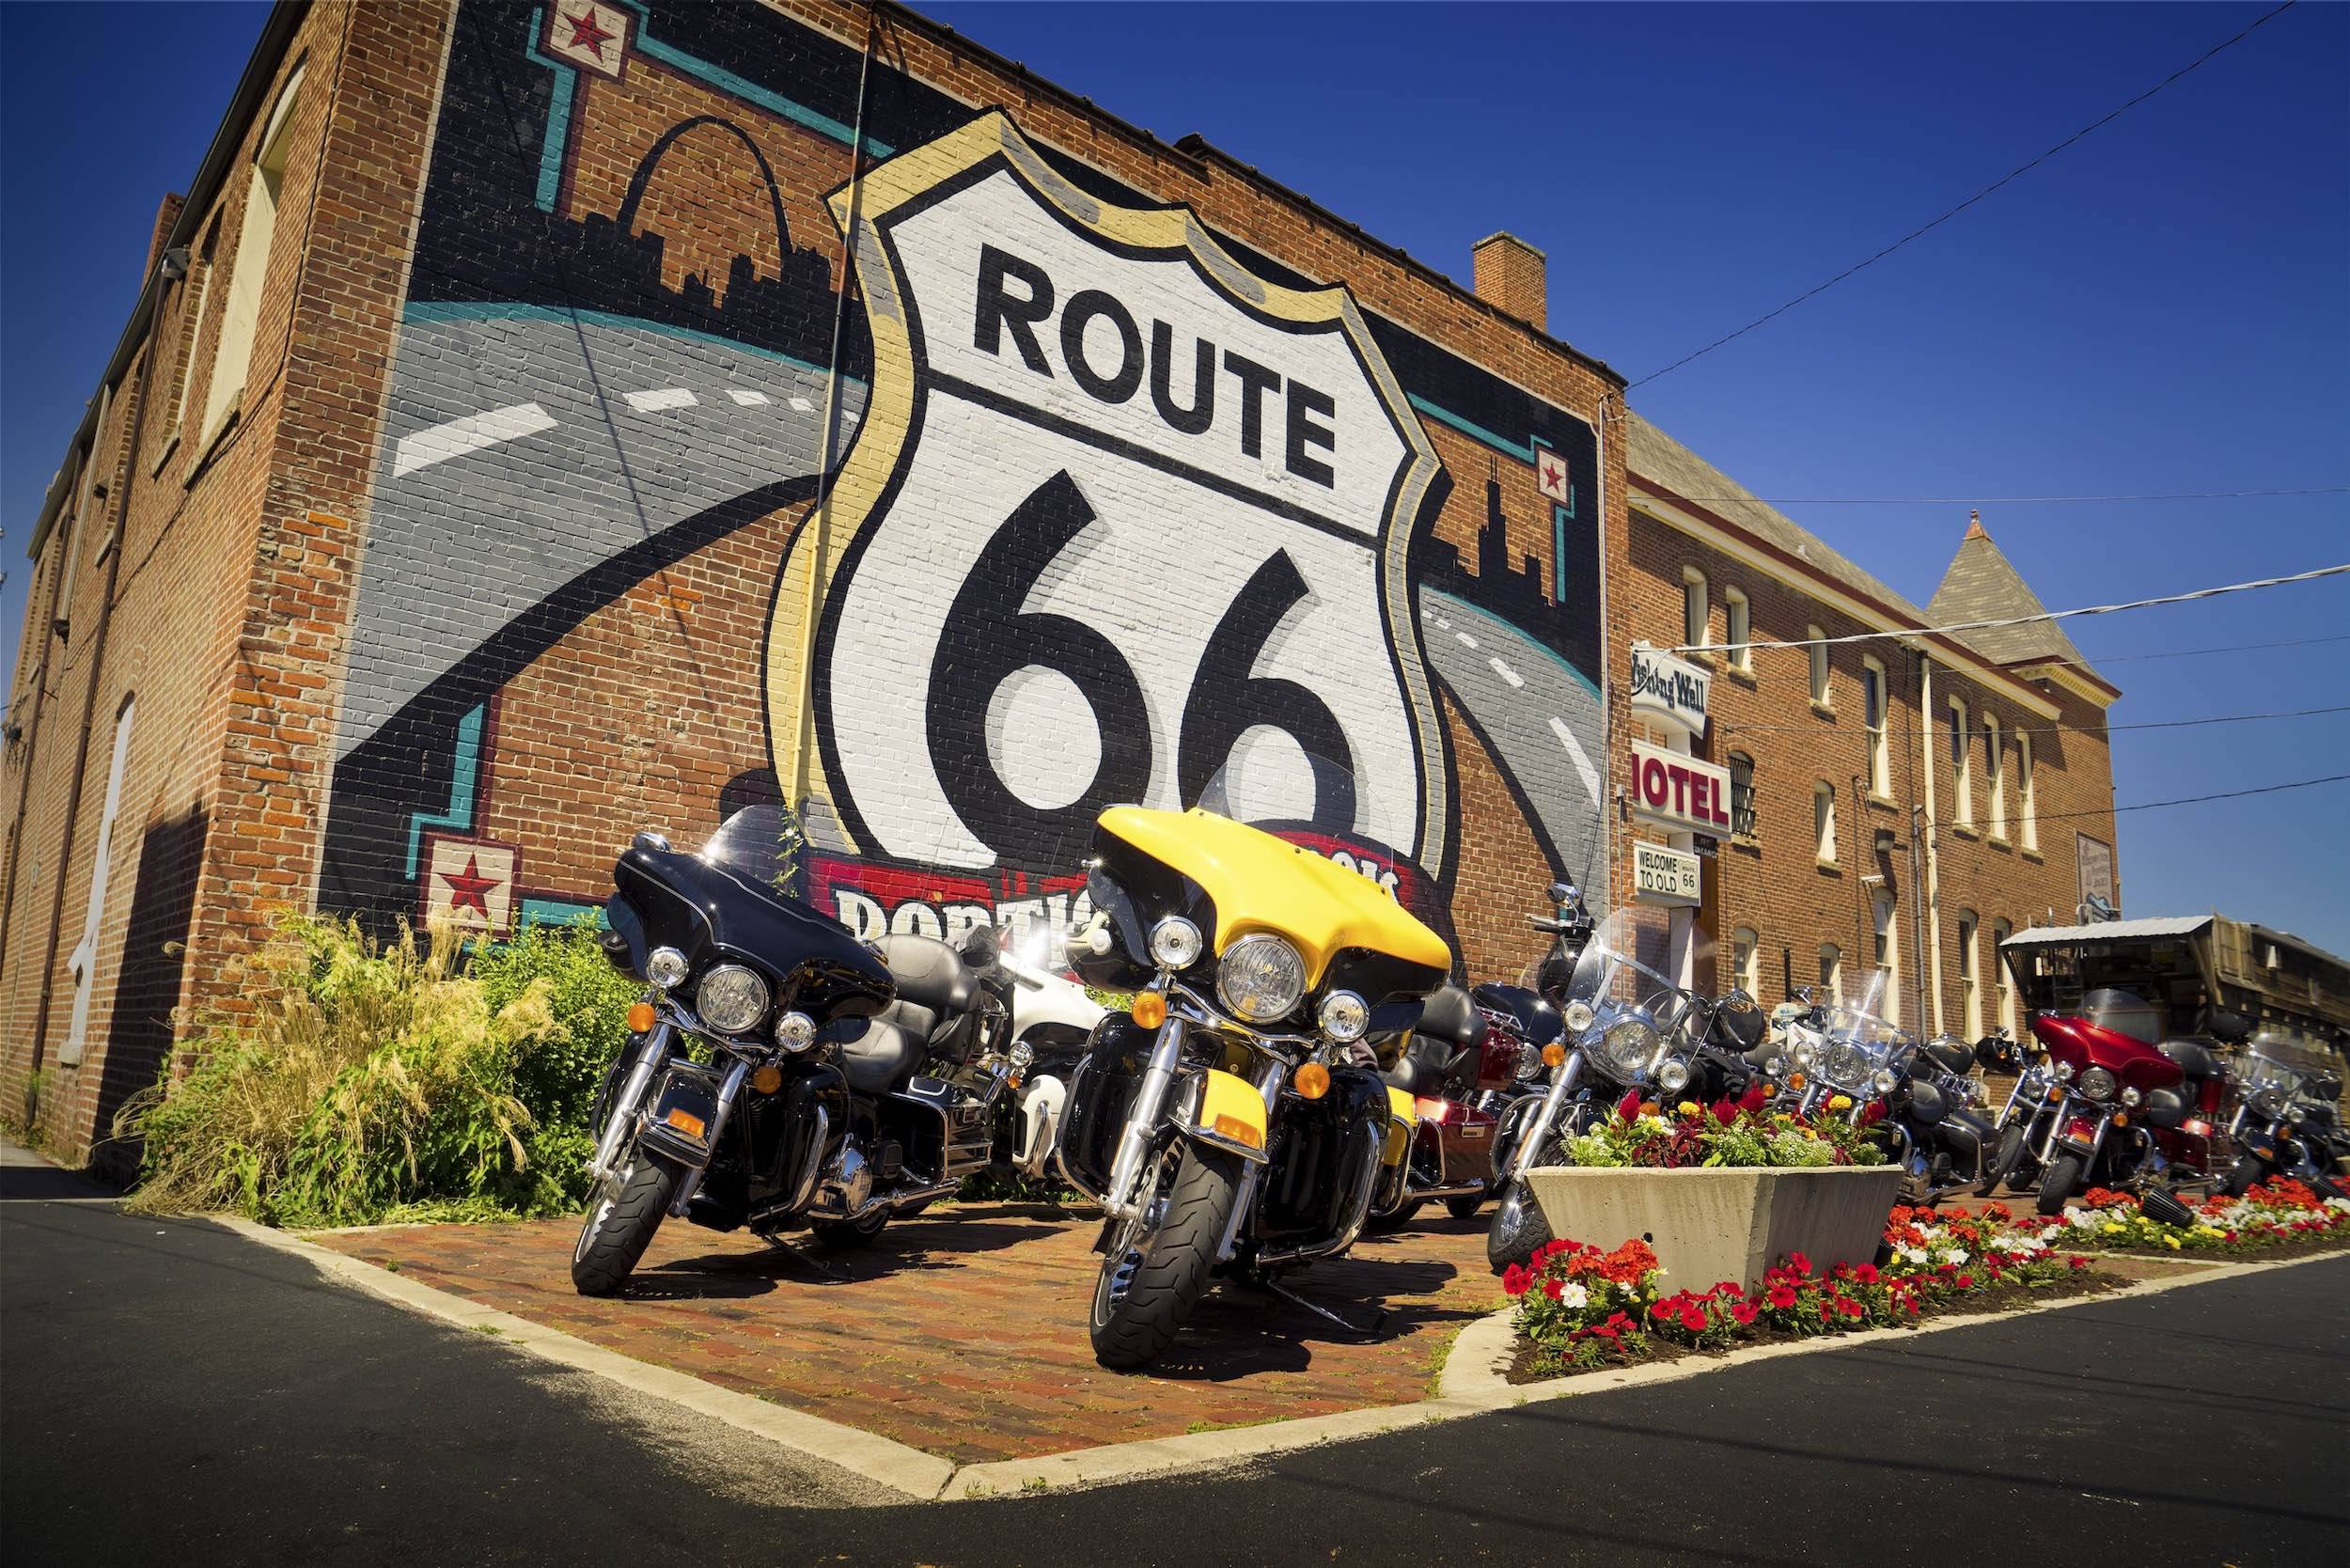 guided motorcycle tours in usa